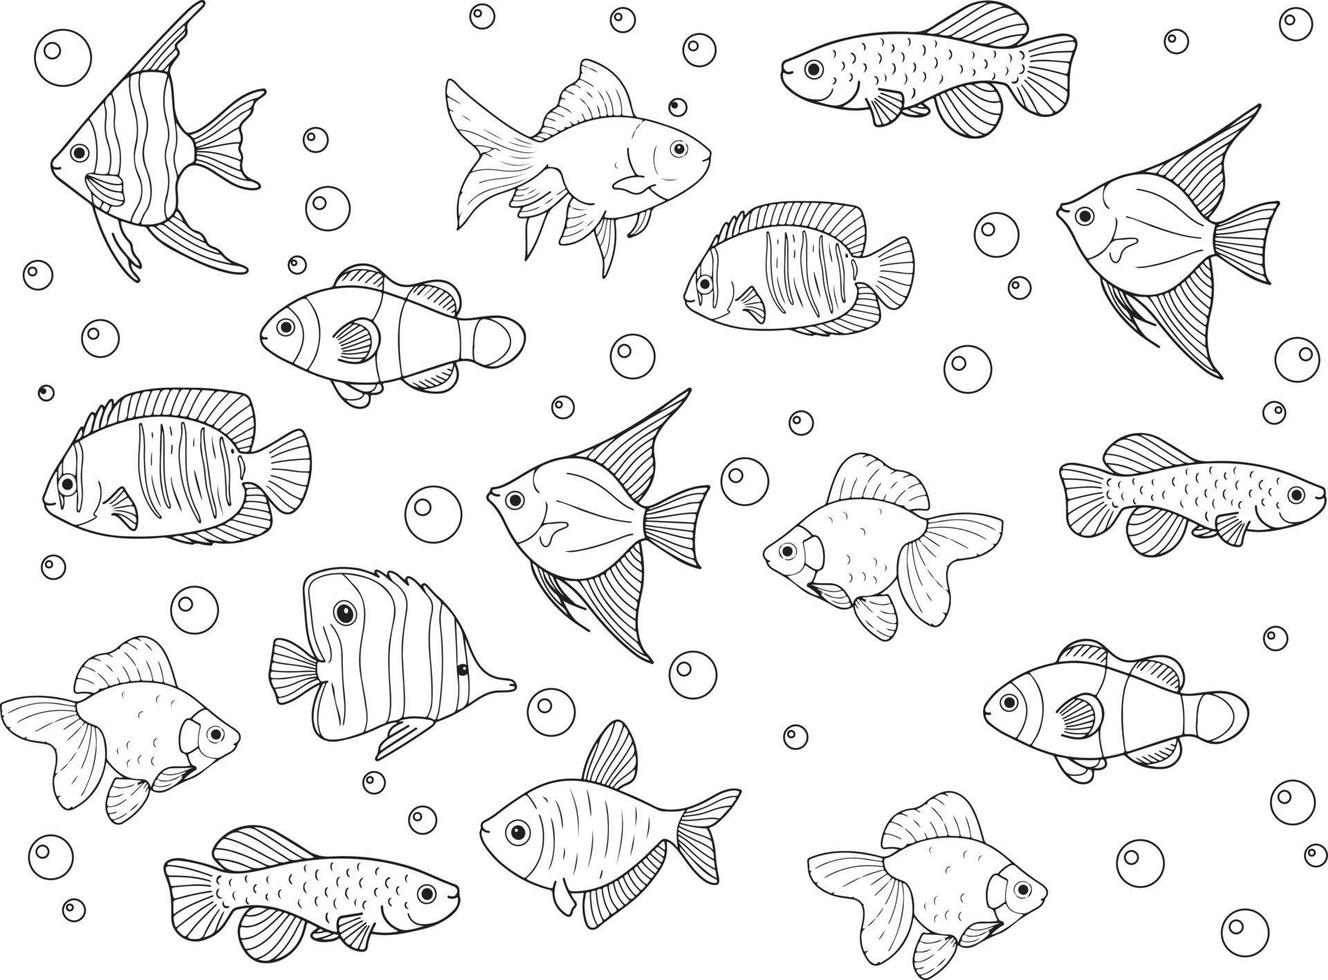 Line art of fish. Vector illustration for coloring pages, coloring book, sticker, poster, etc